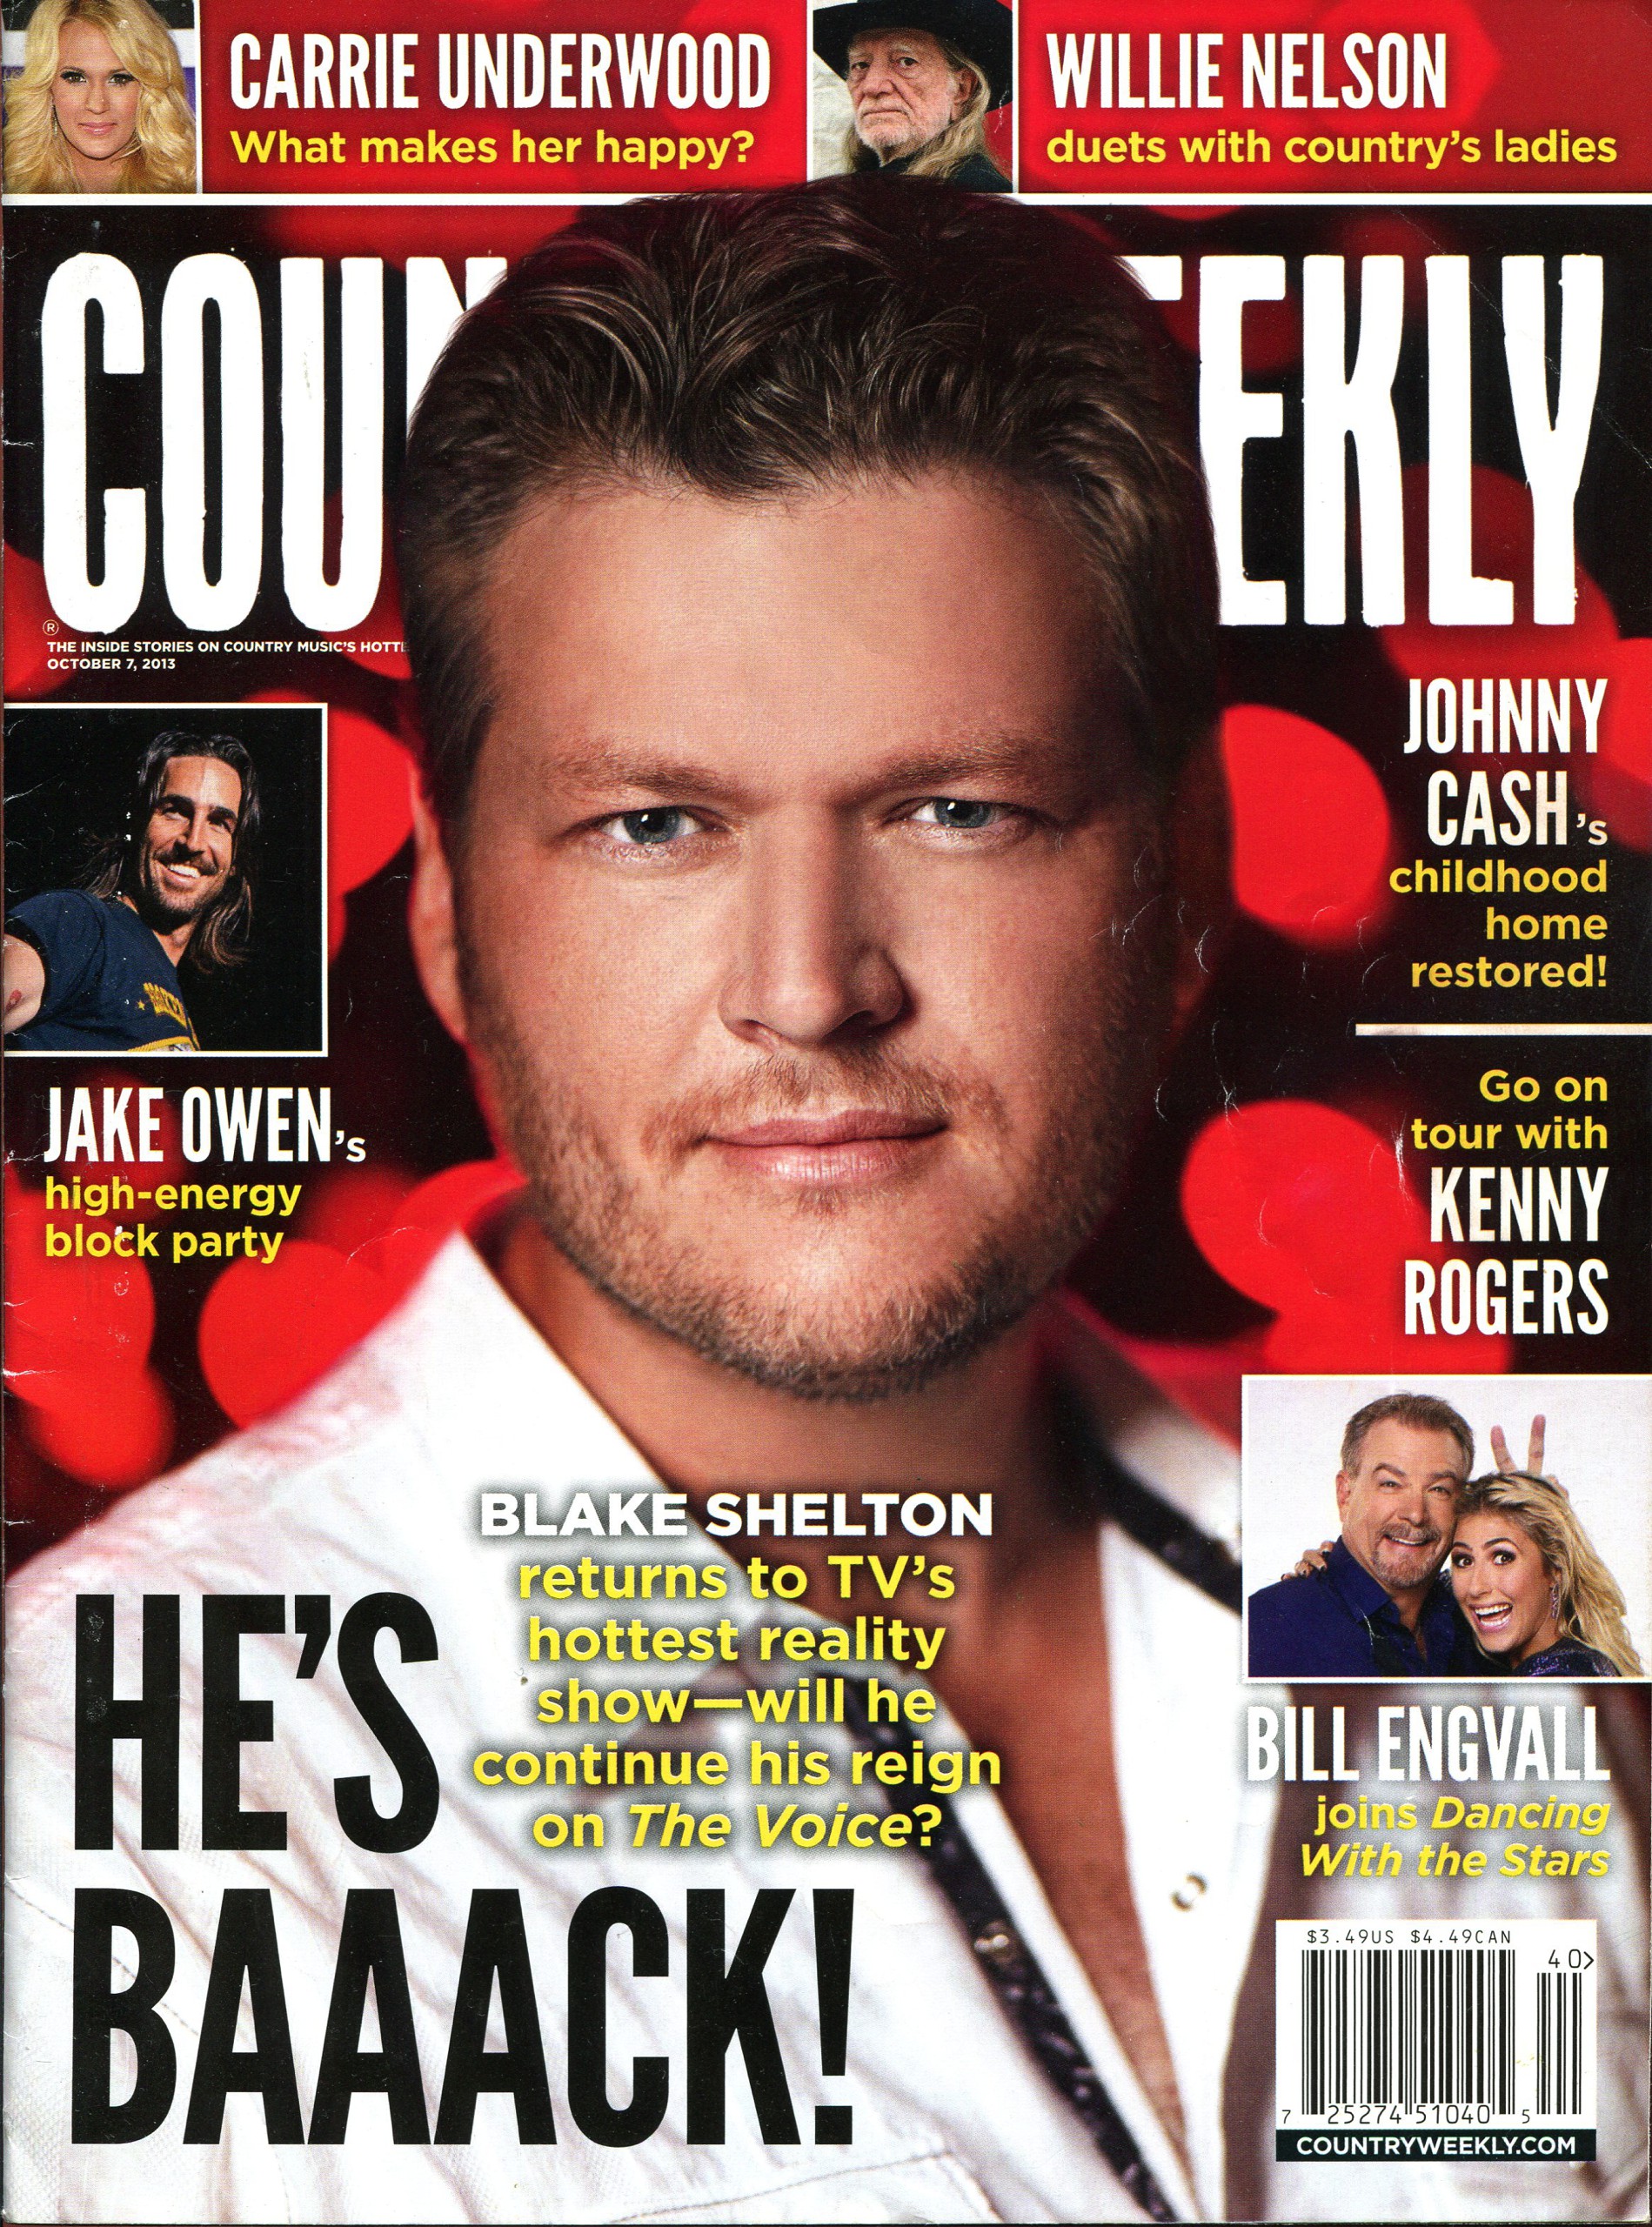 Country Weekly - Oct. 7th 2013